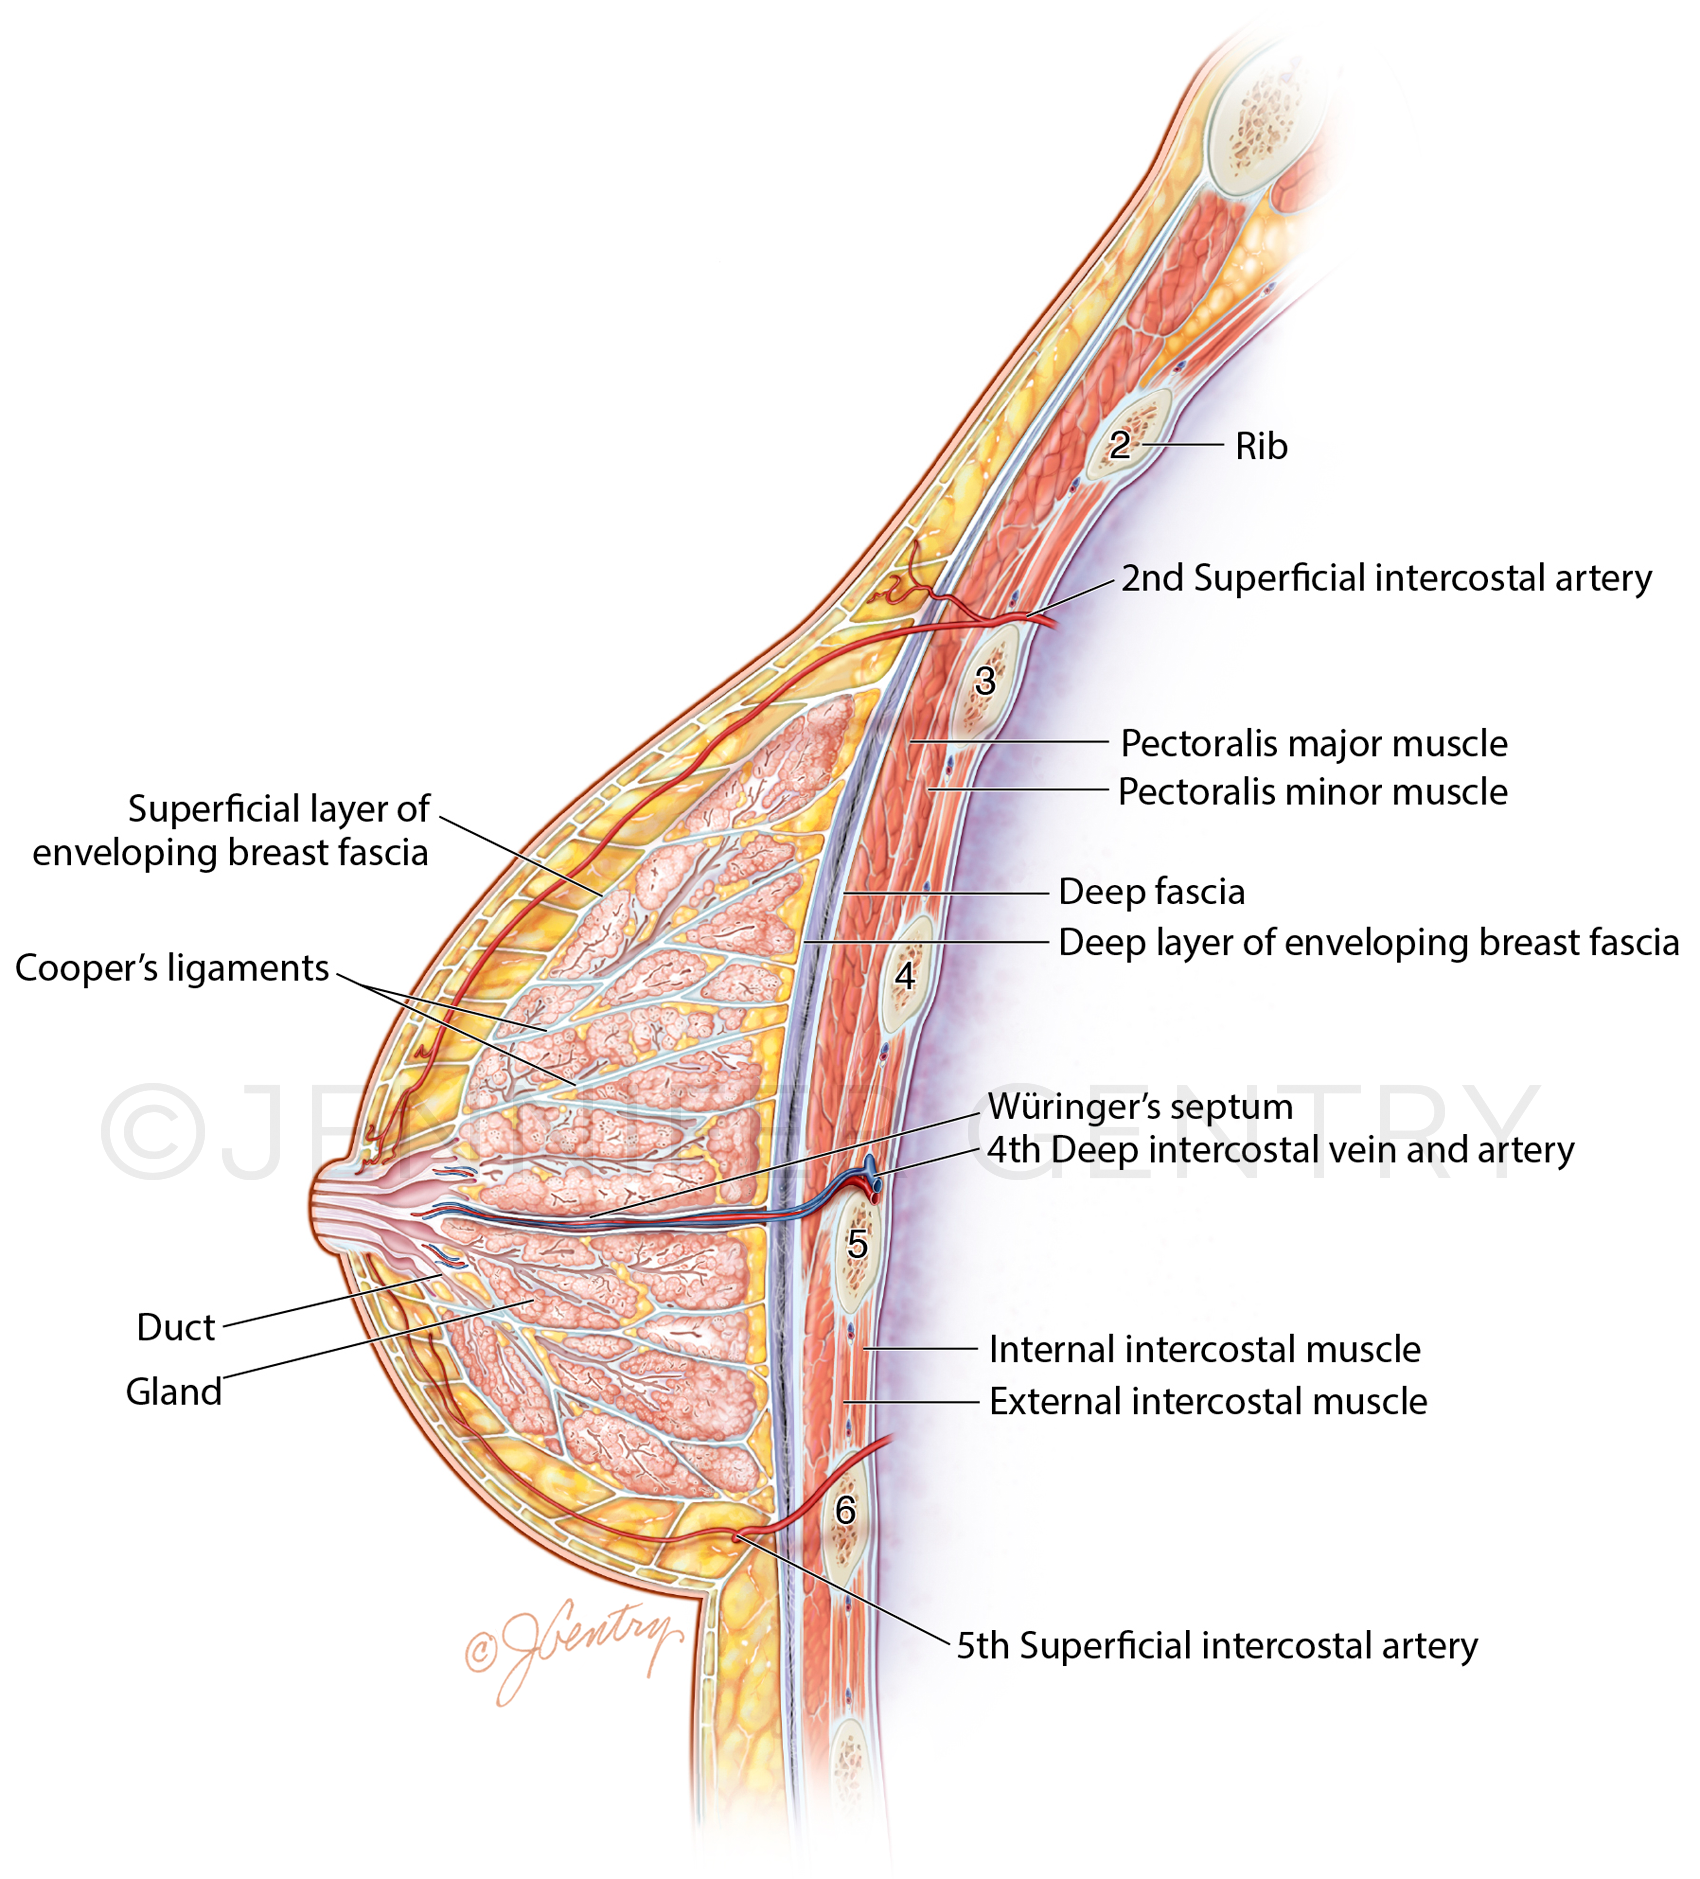 Arterial Supply of the Breast